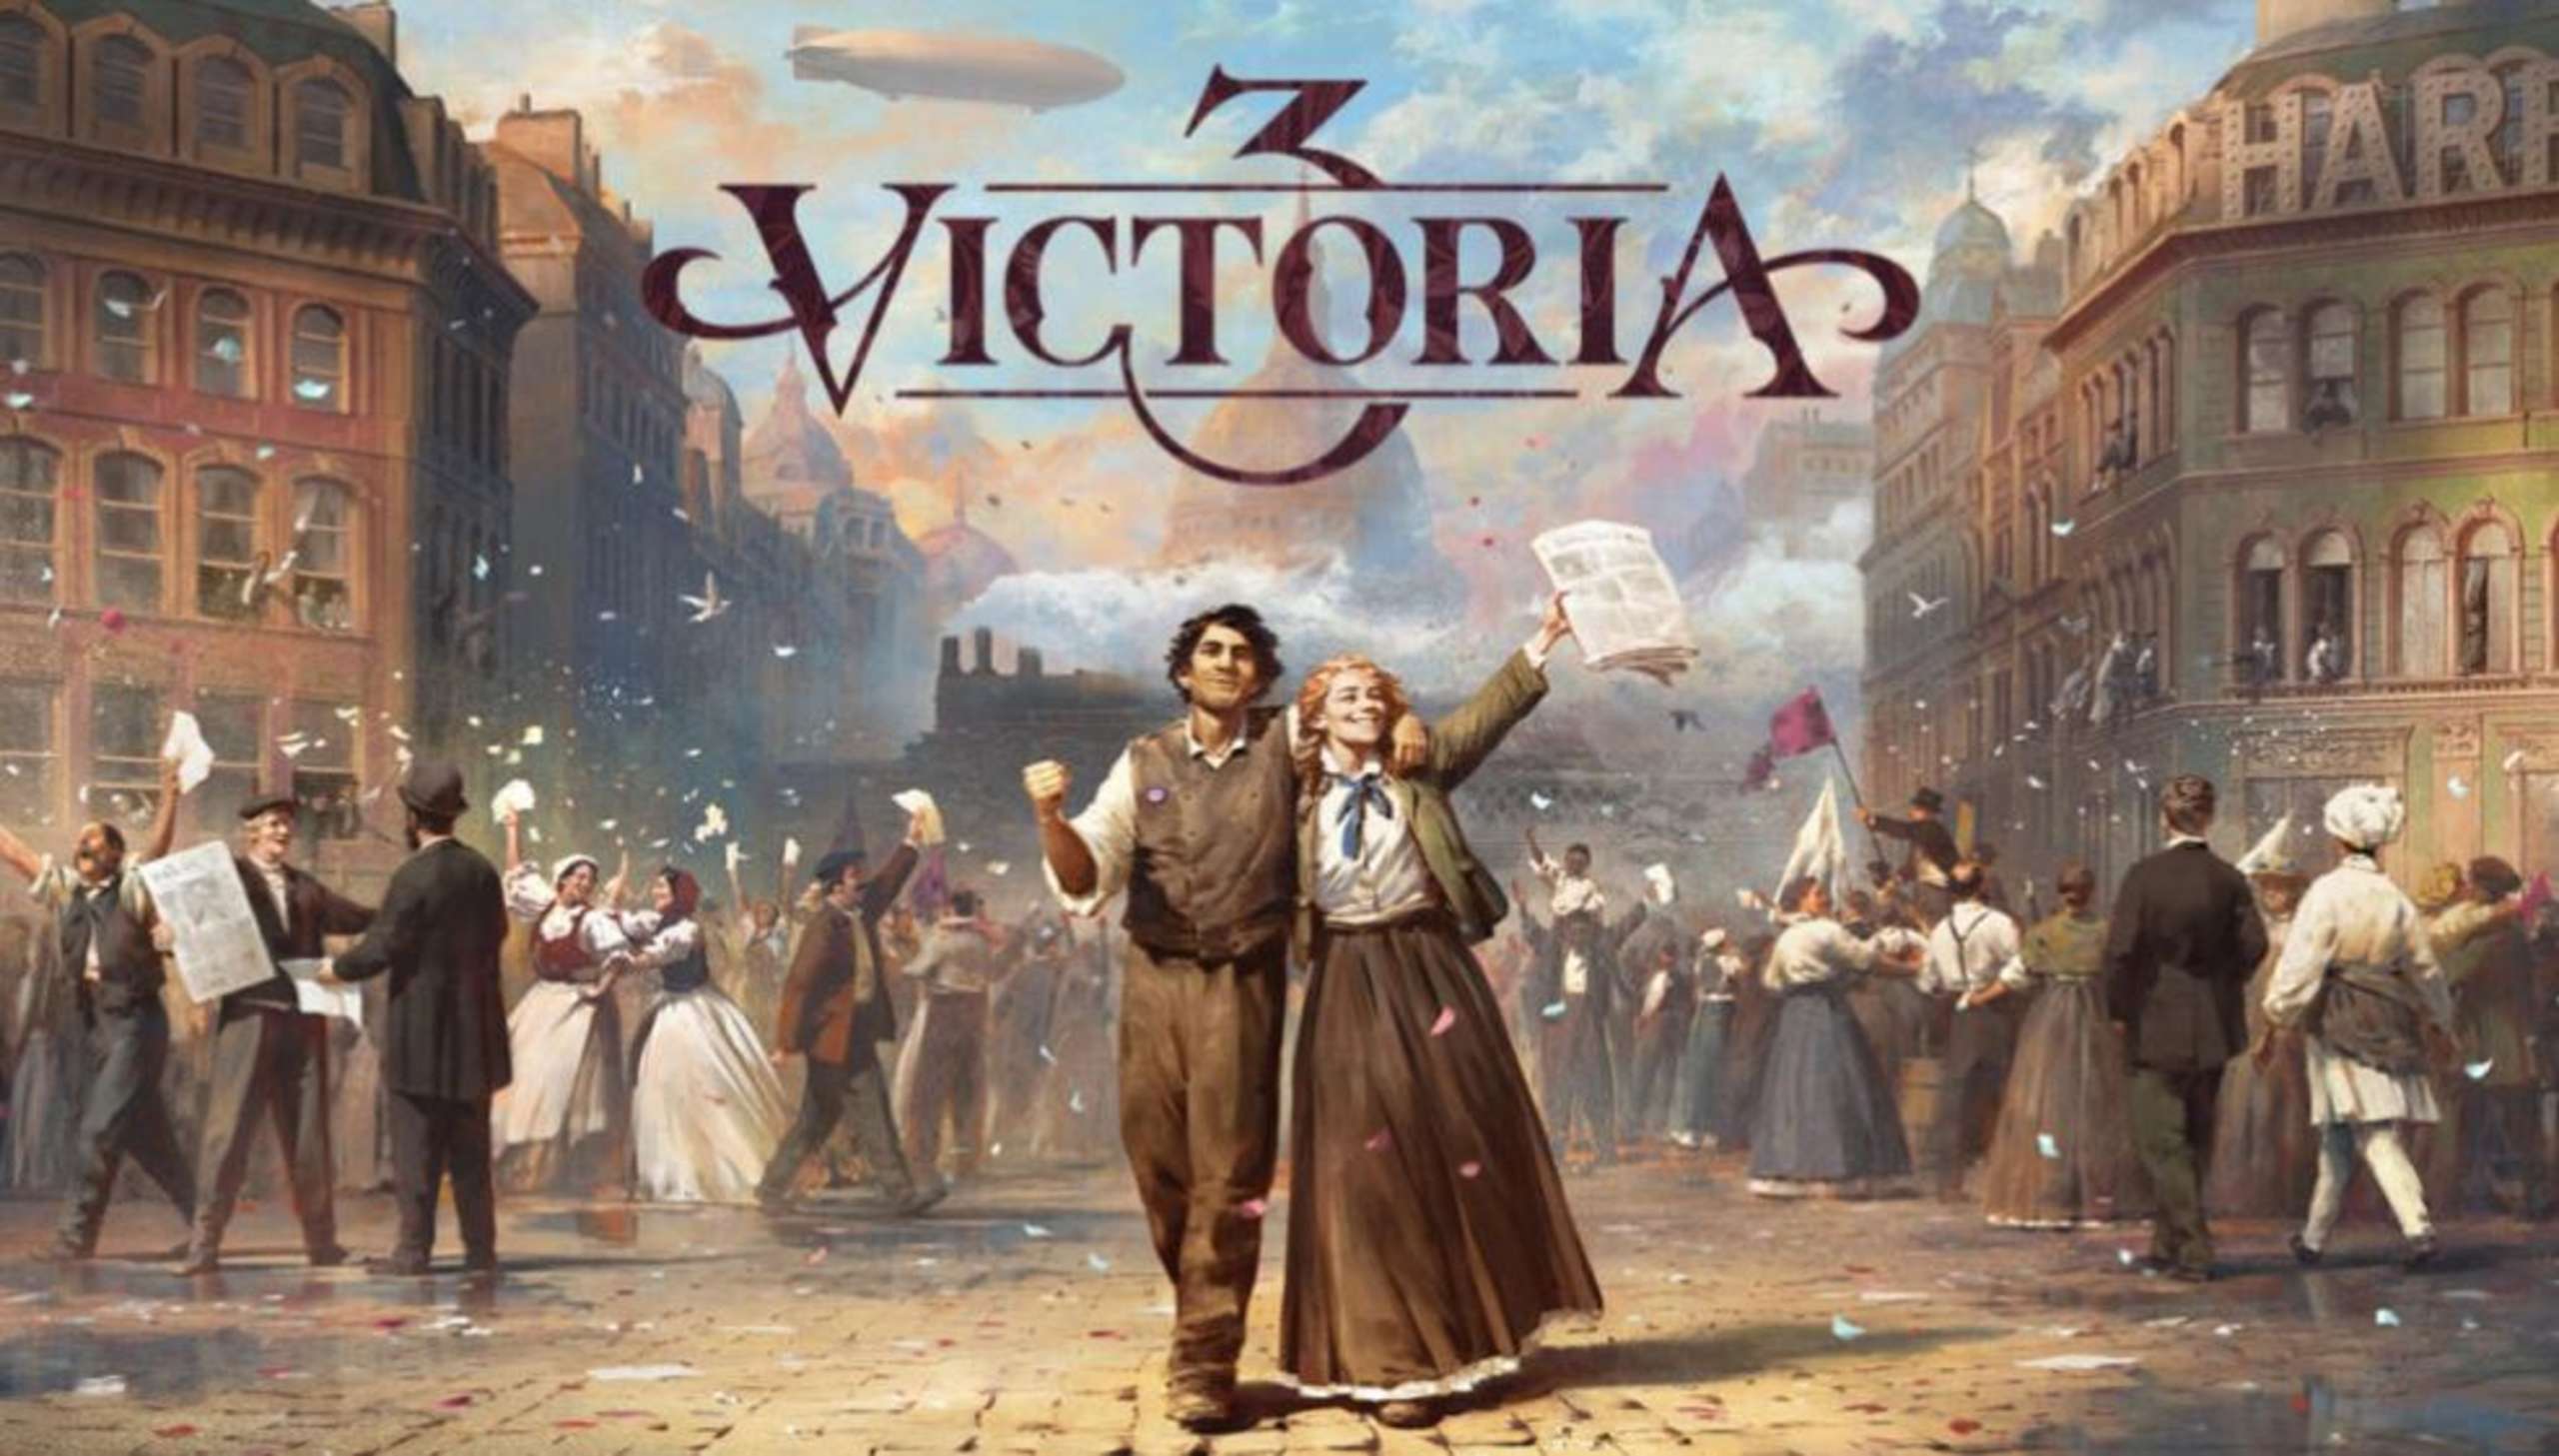 Victoria 3, The Upcoming Major Grand Strategy Title From Paradox Interactive, Now Has A New Trailer And A Release Date